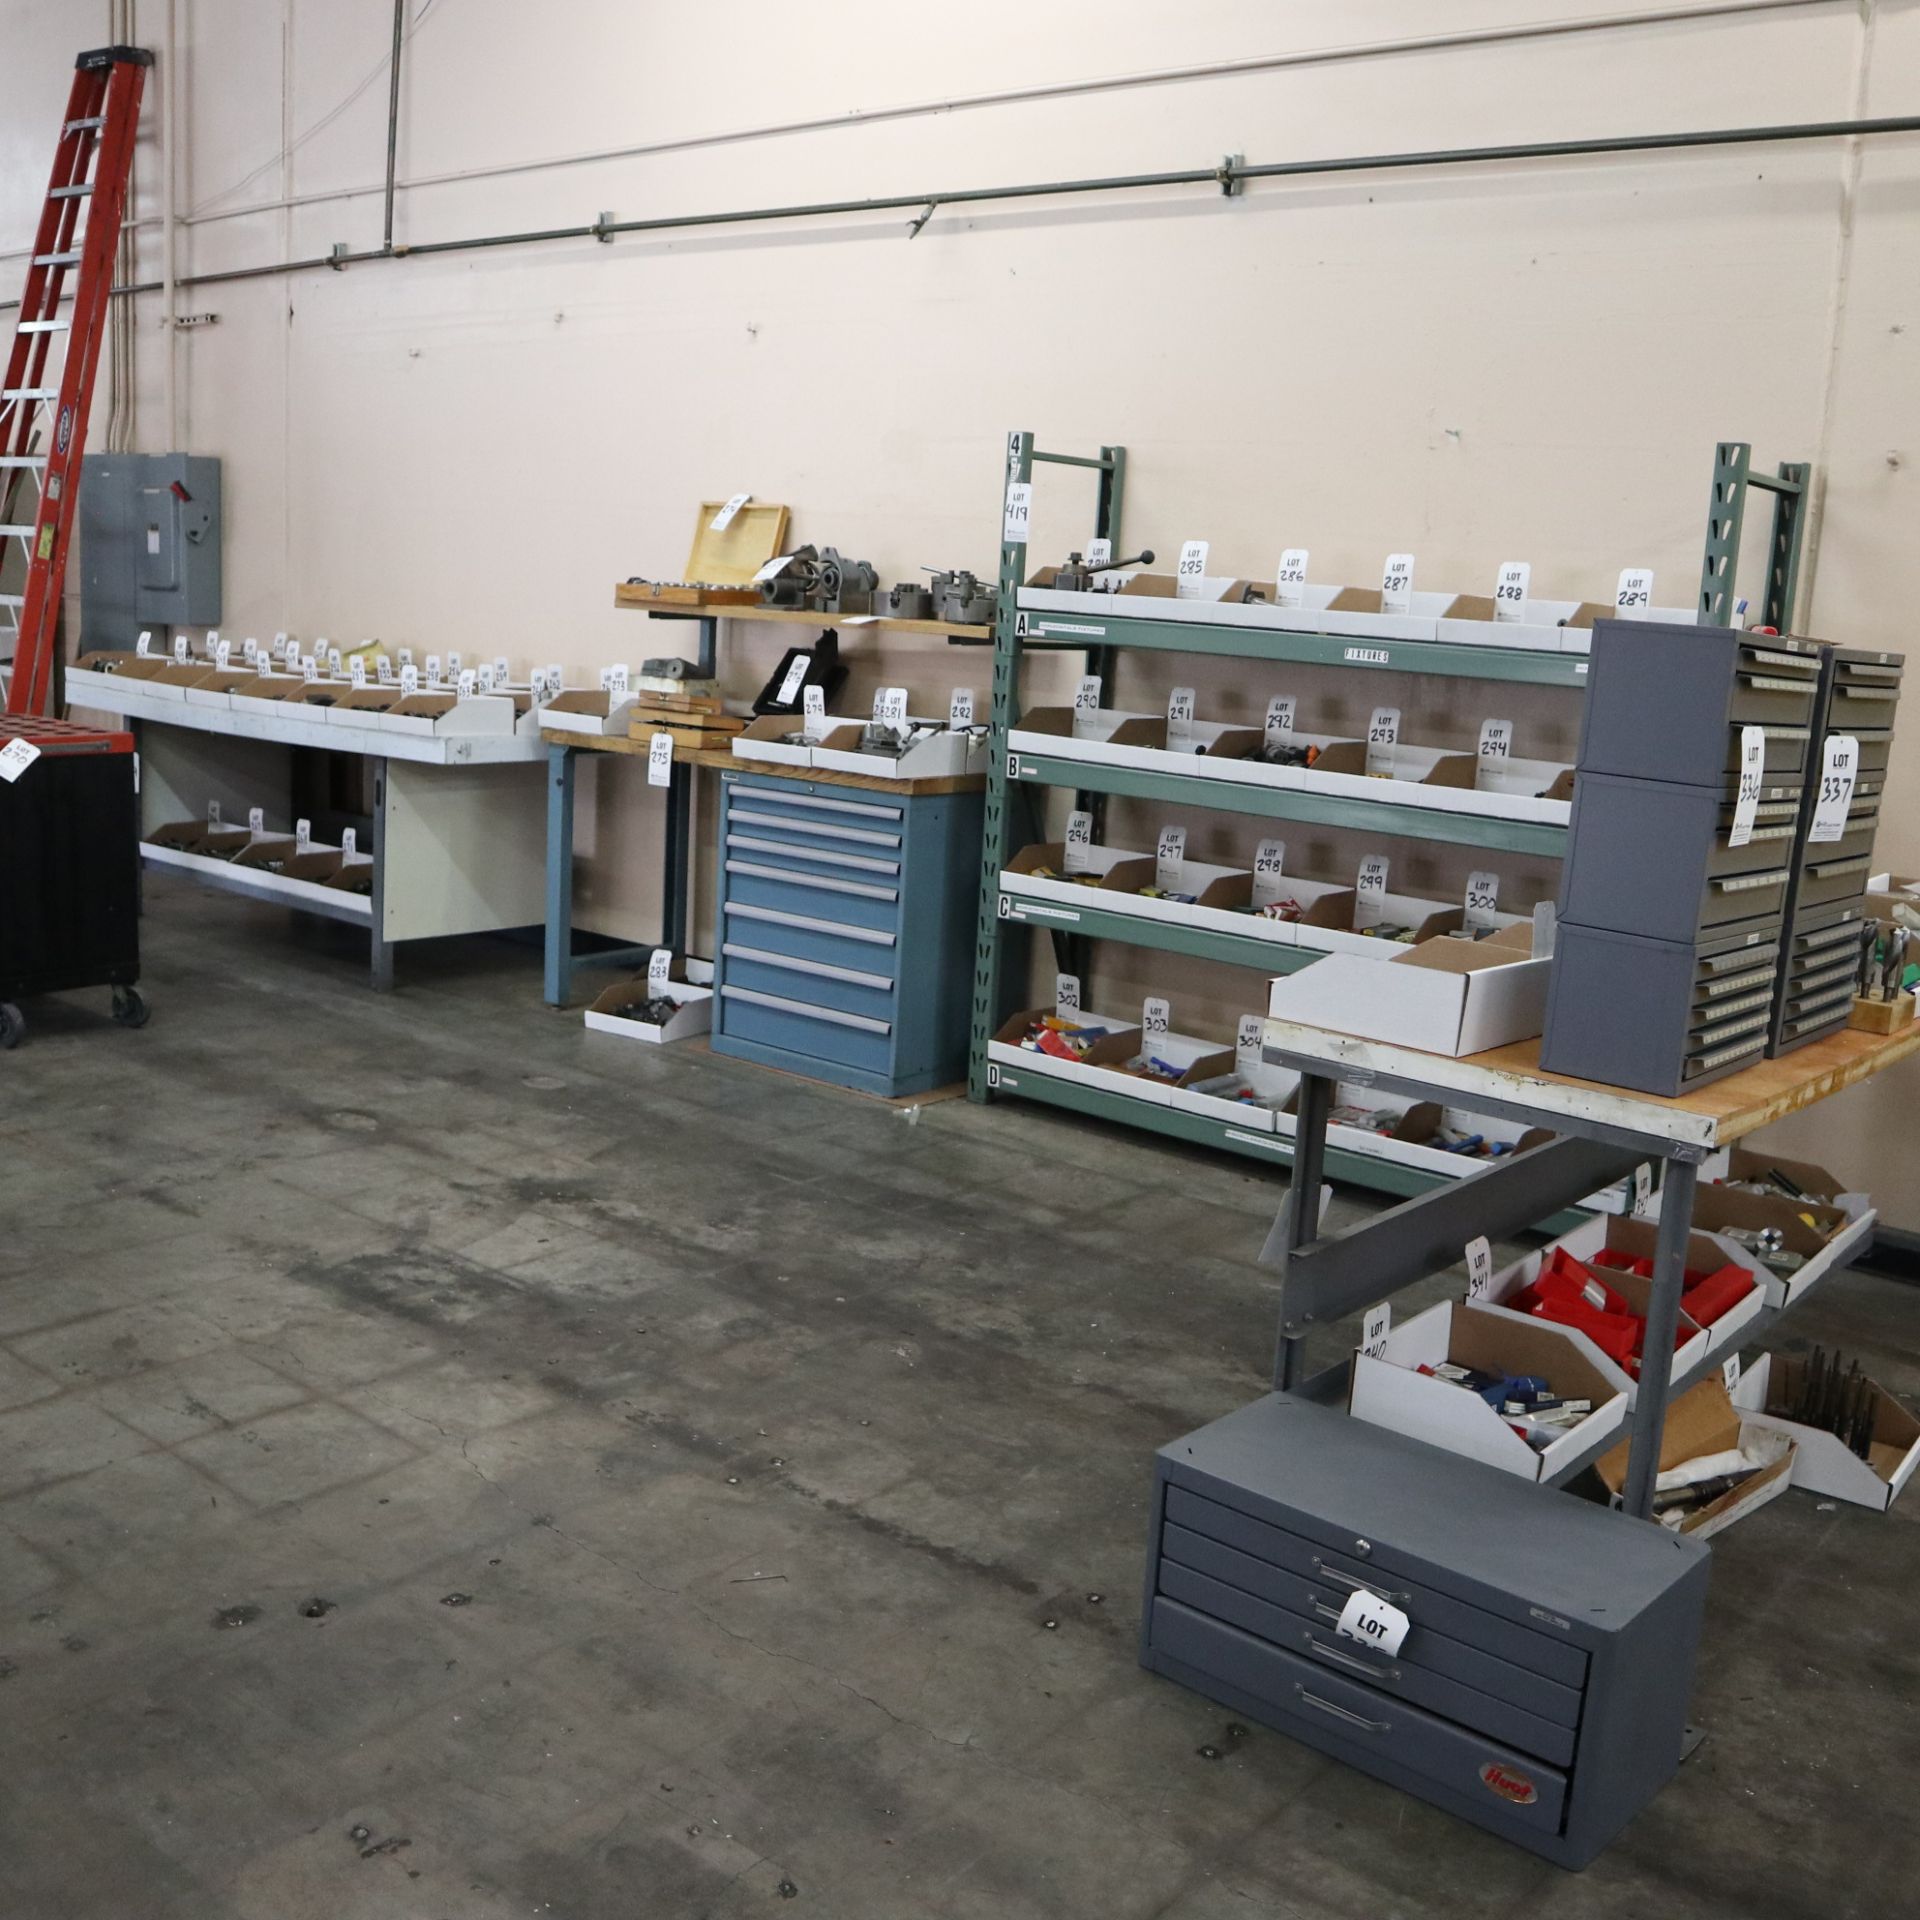 LOT TO INCLUDE: (1) LISTA TABLE WORKBENCHES, 7 DRAWER CABINET DIMENSIONS 6' X 30" X 35", (2) SHOP